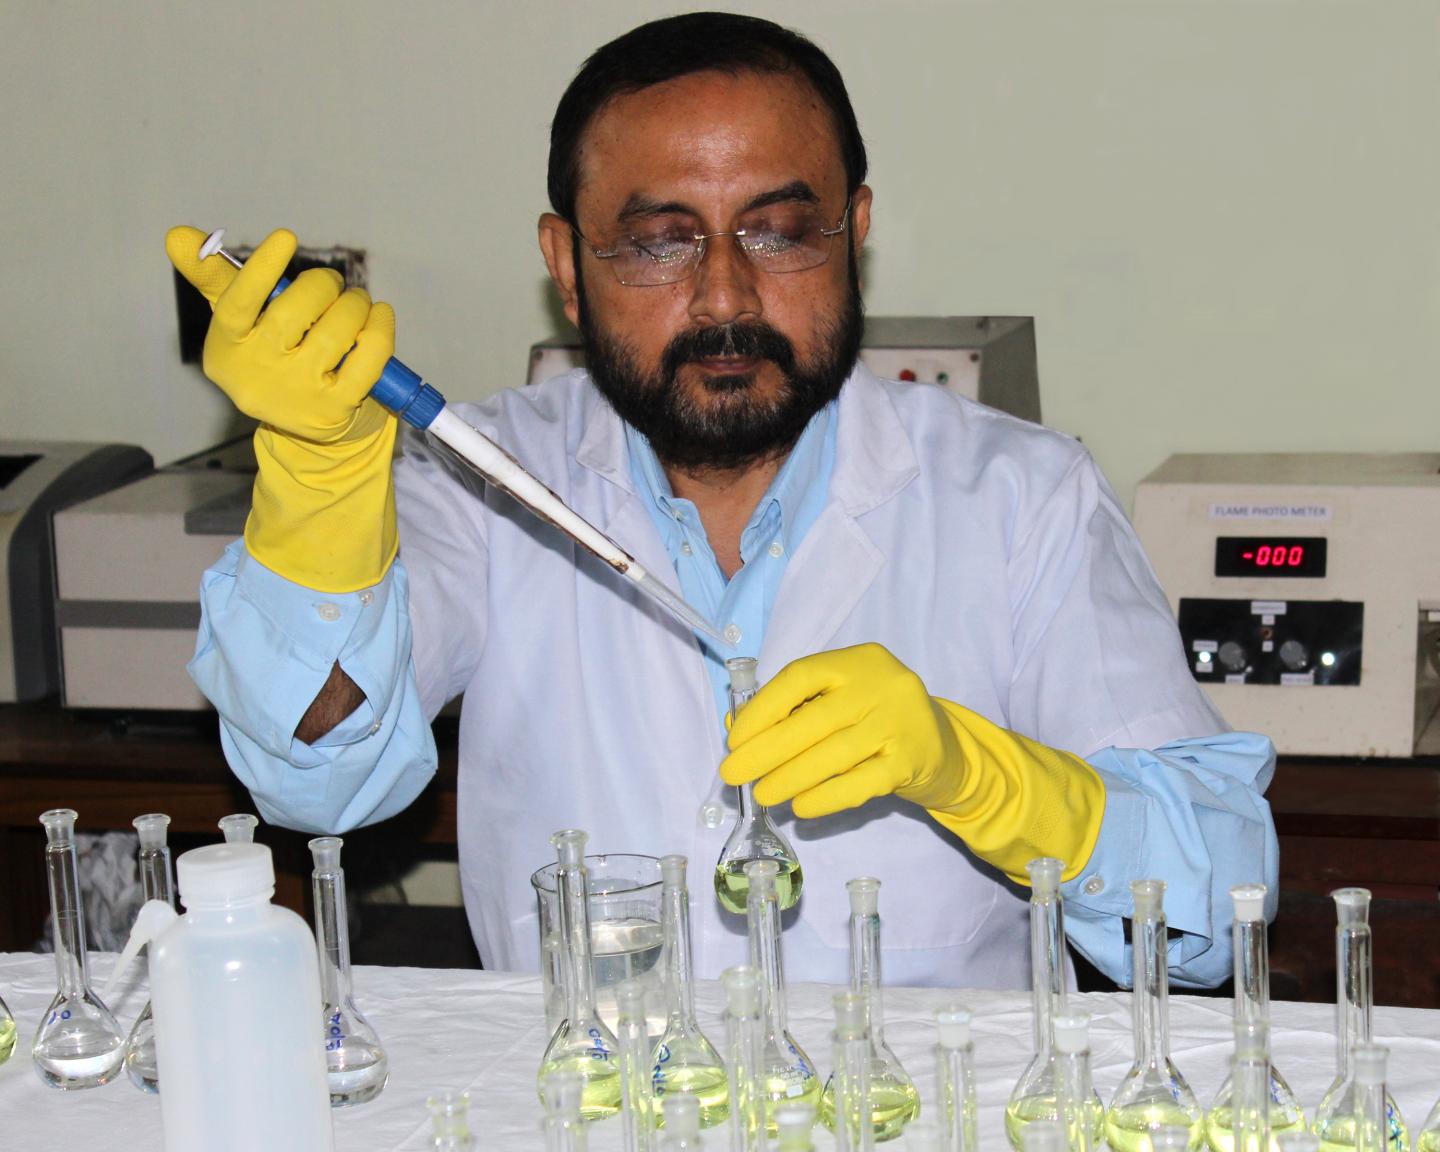 Researcher with Pipette and Flasks